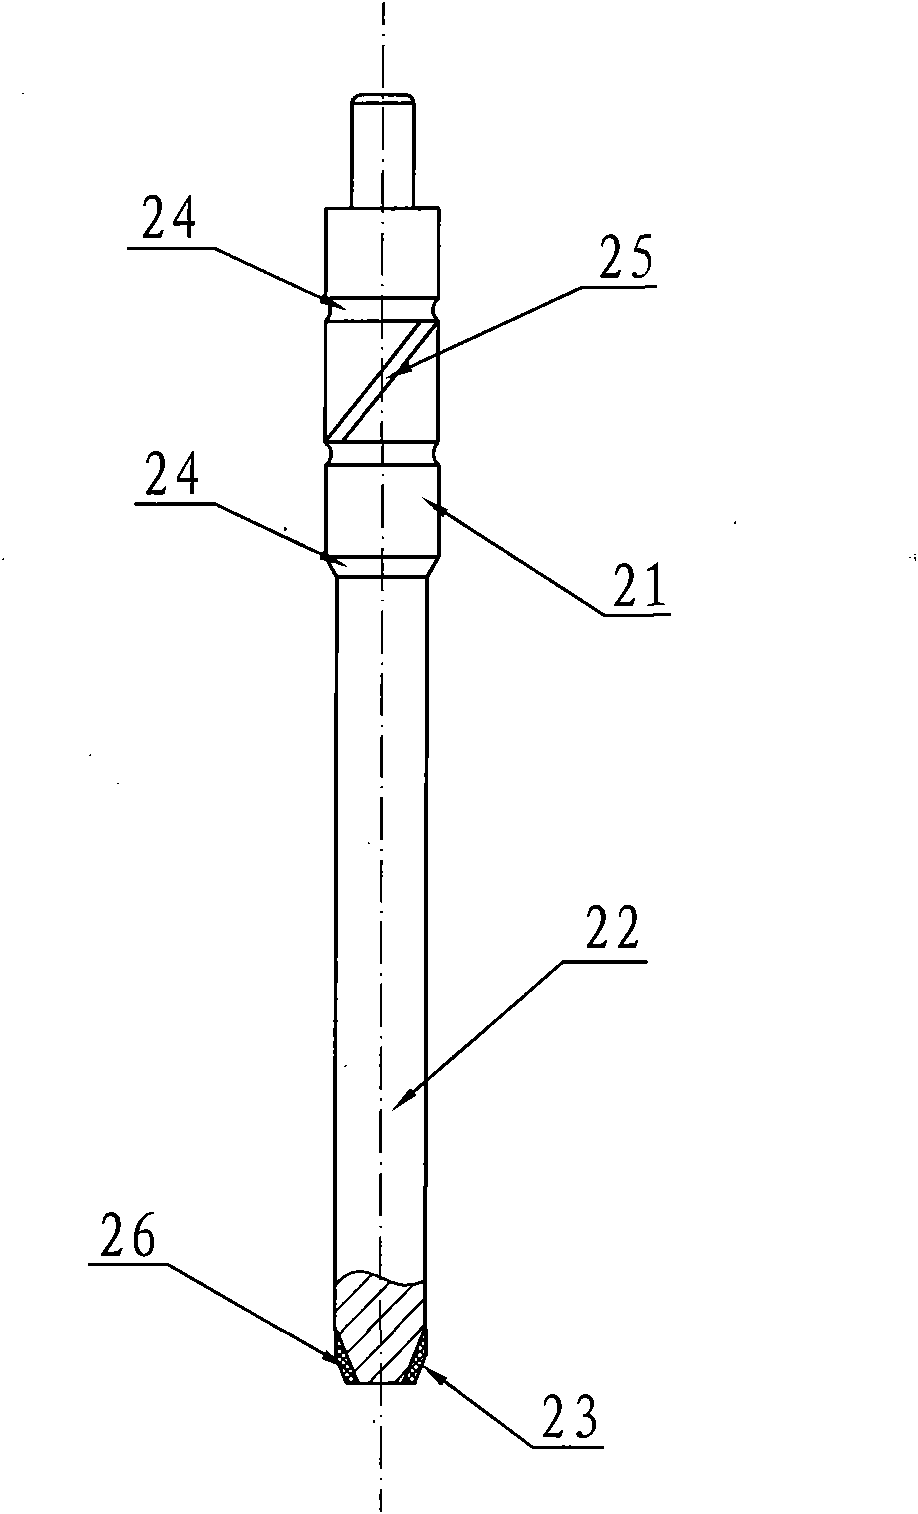 Diesel injector coupler applied to multiple fuels